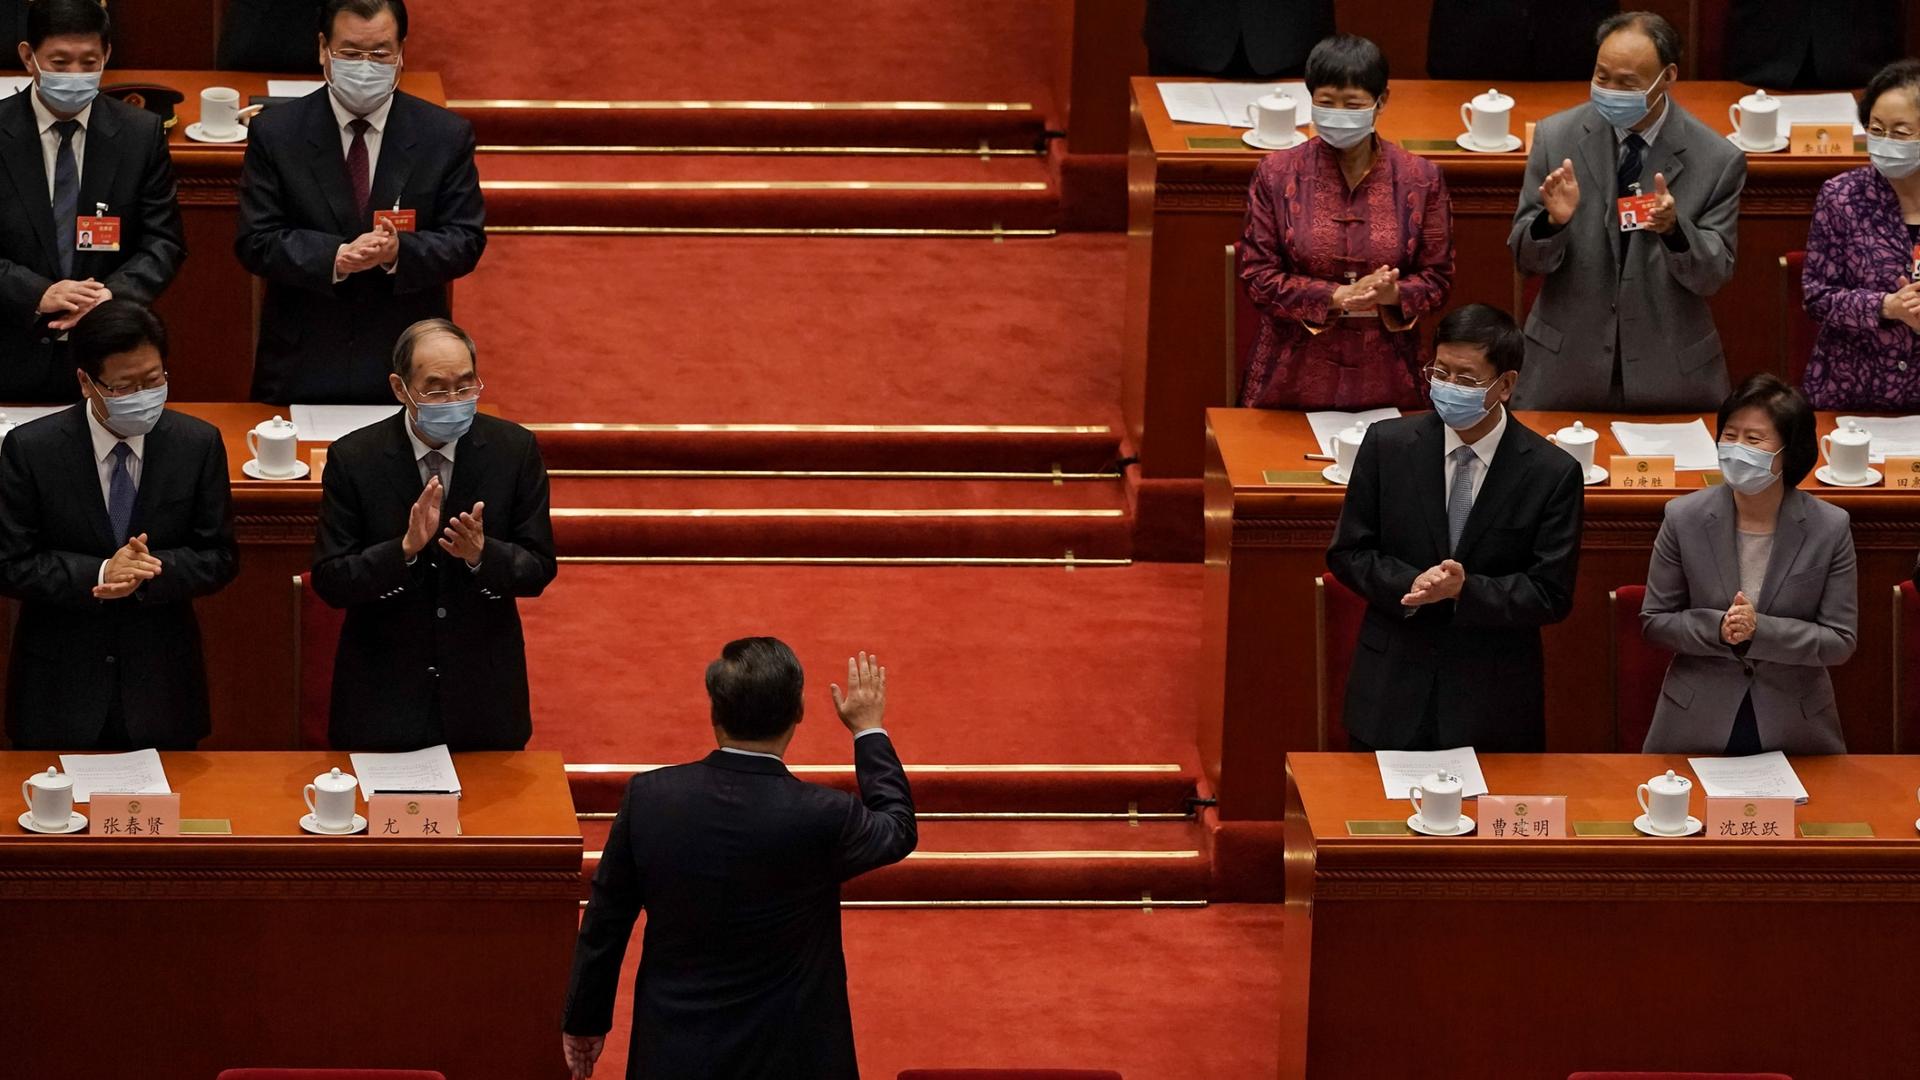 Chinese President Xi Jinping is shown with his back toward the camera and facing several rows of government officials who are clapping.